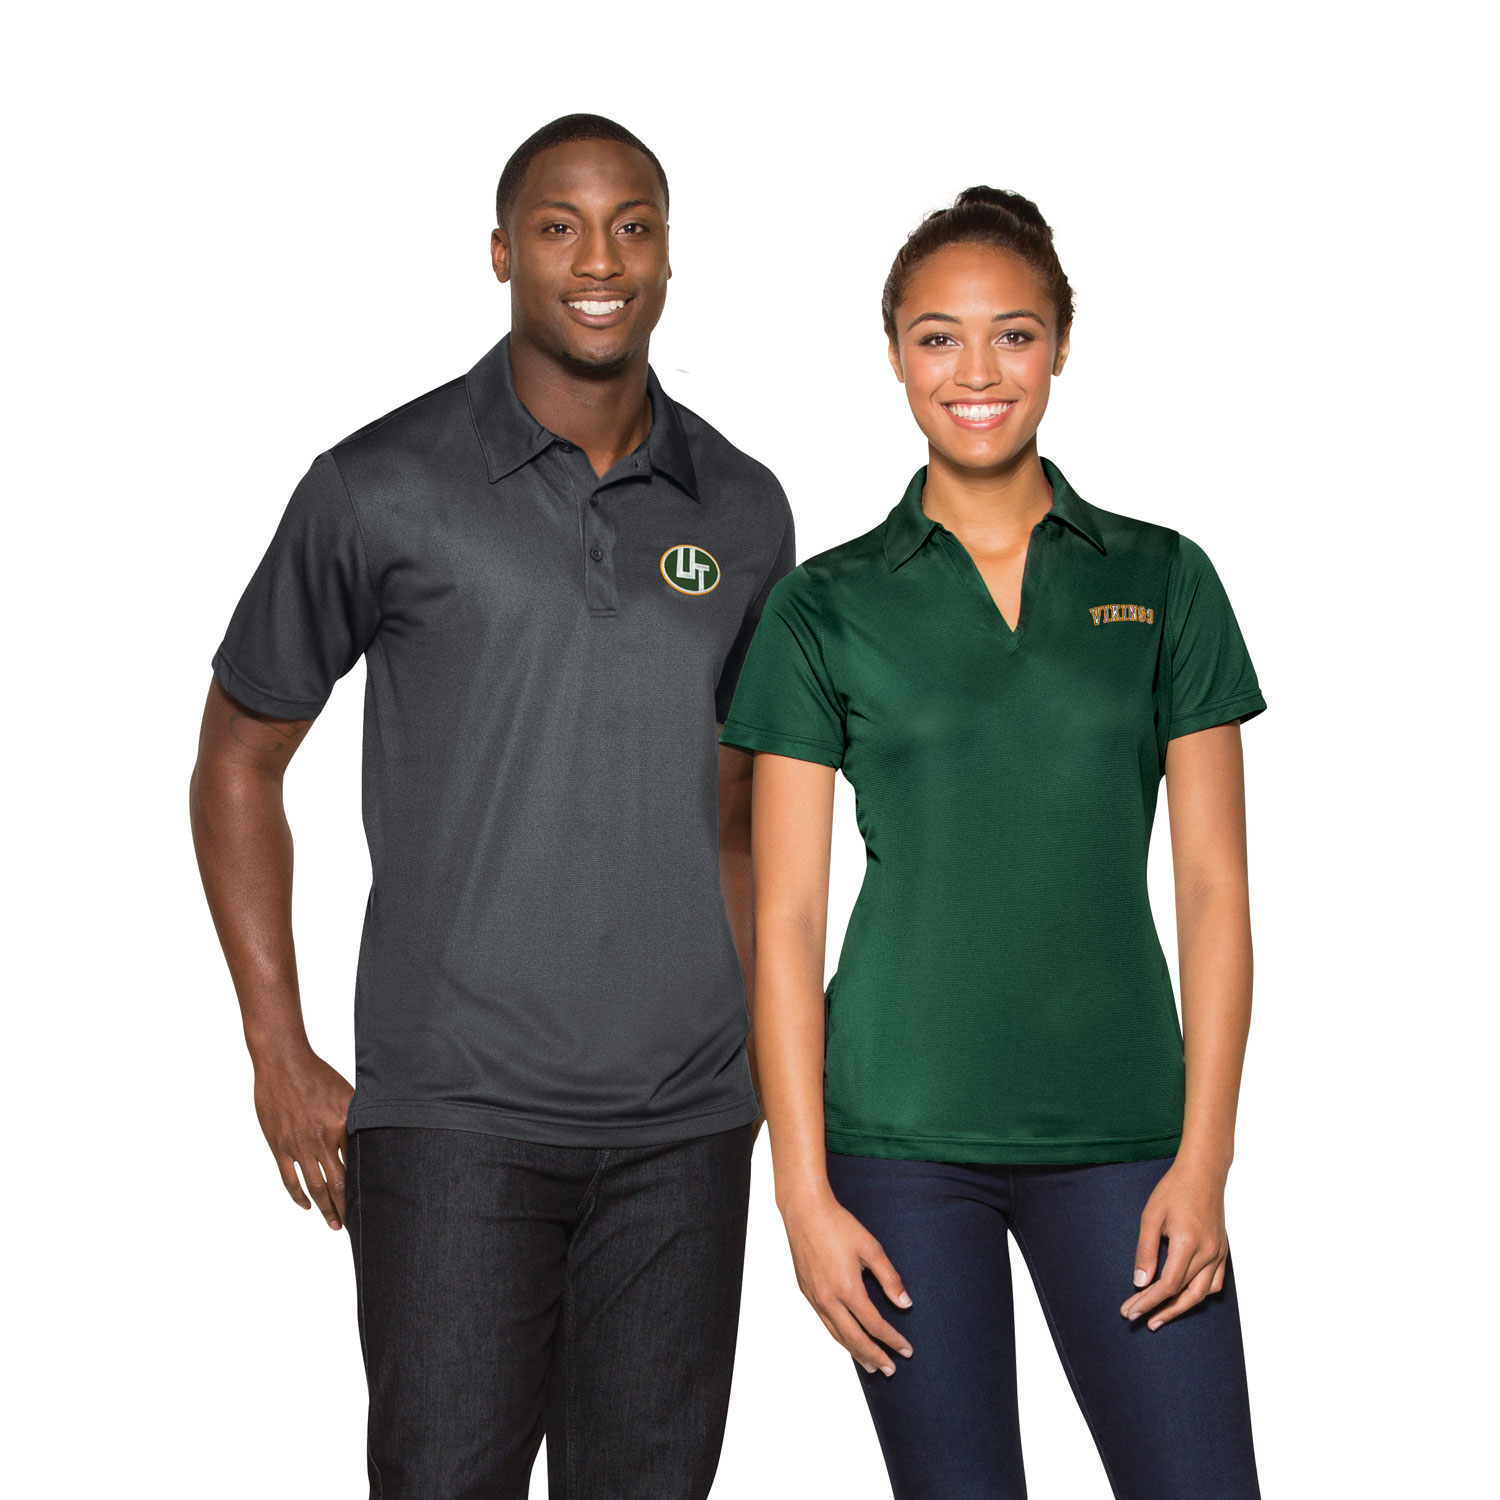 women's embroidered polo shirts